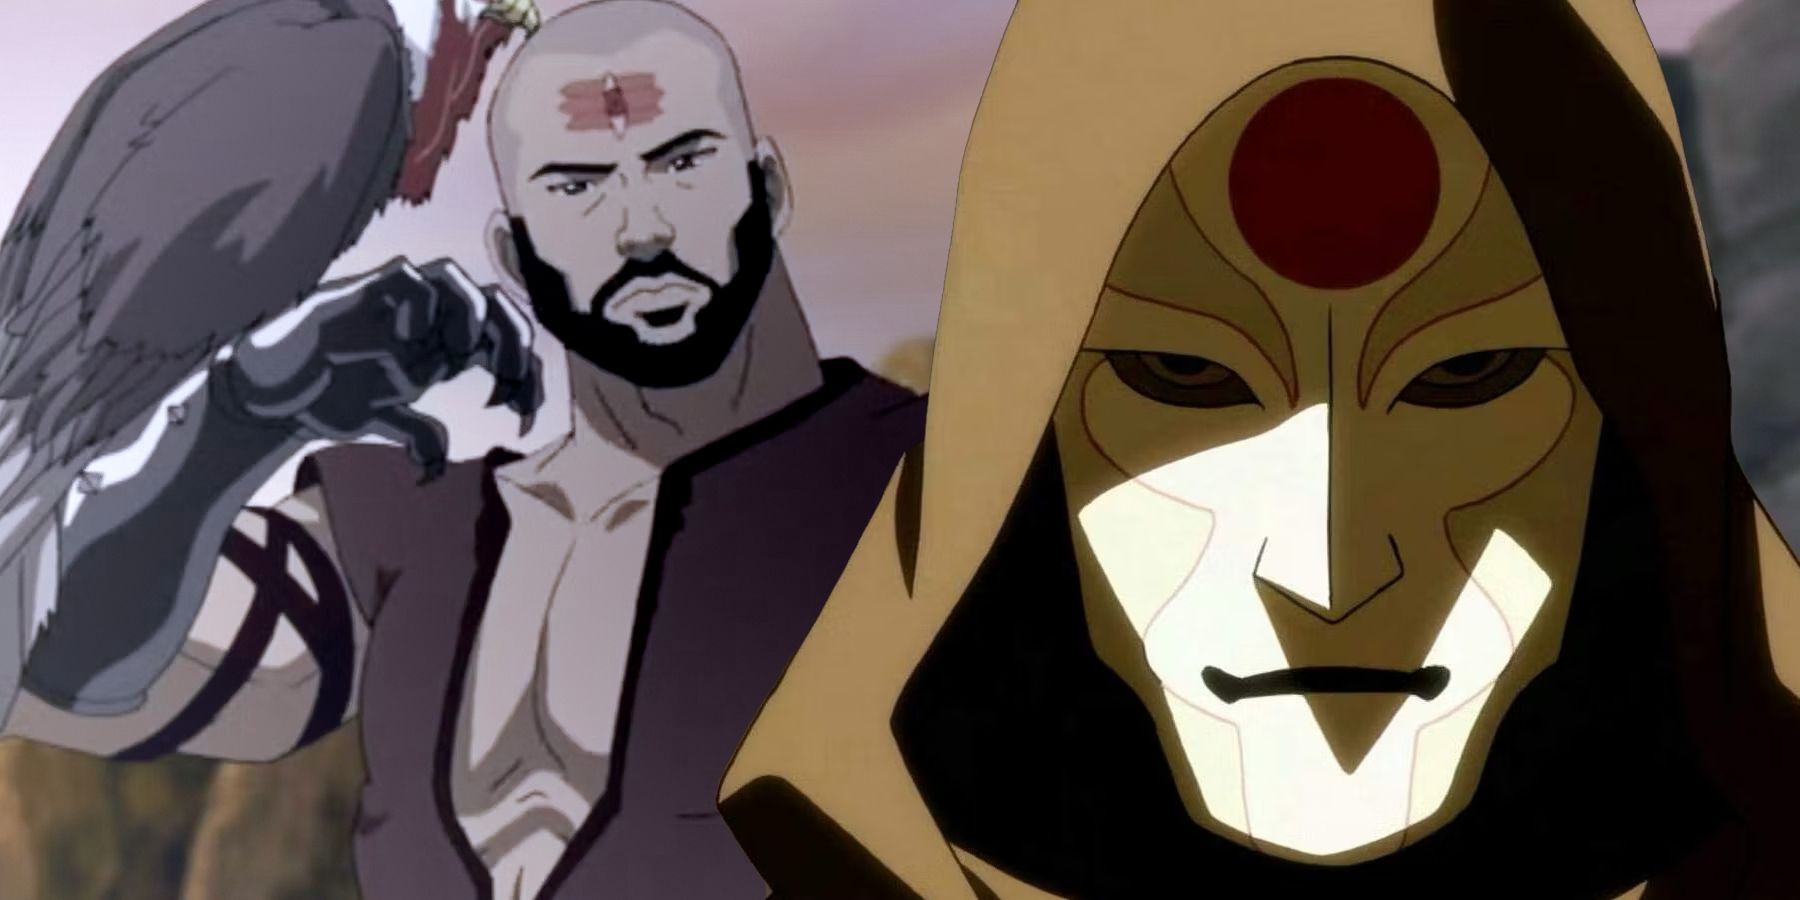 Avatar's Combustion Man and Amon